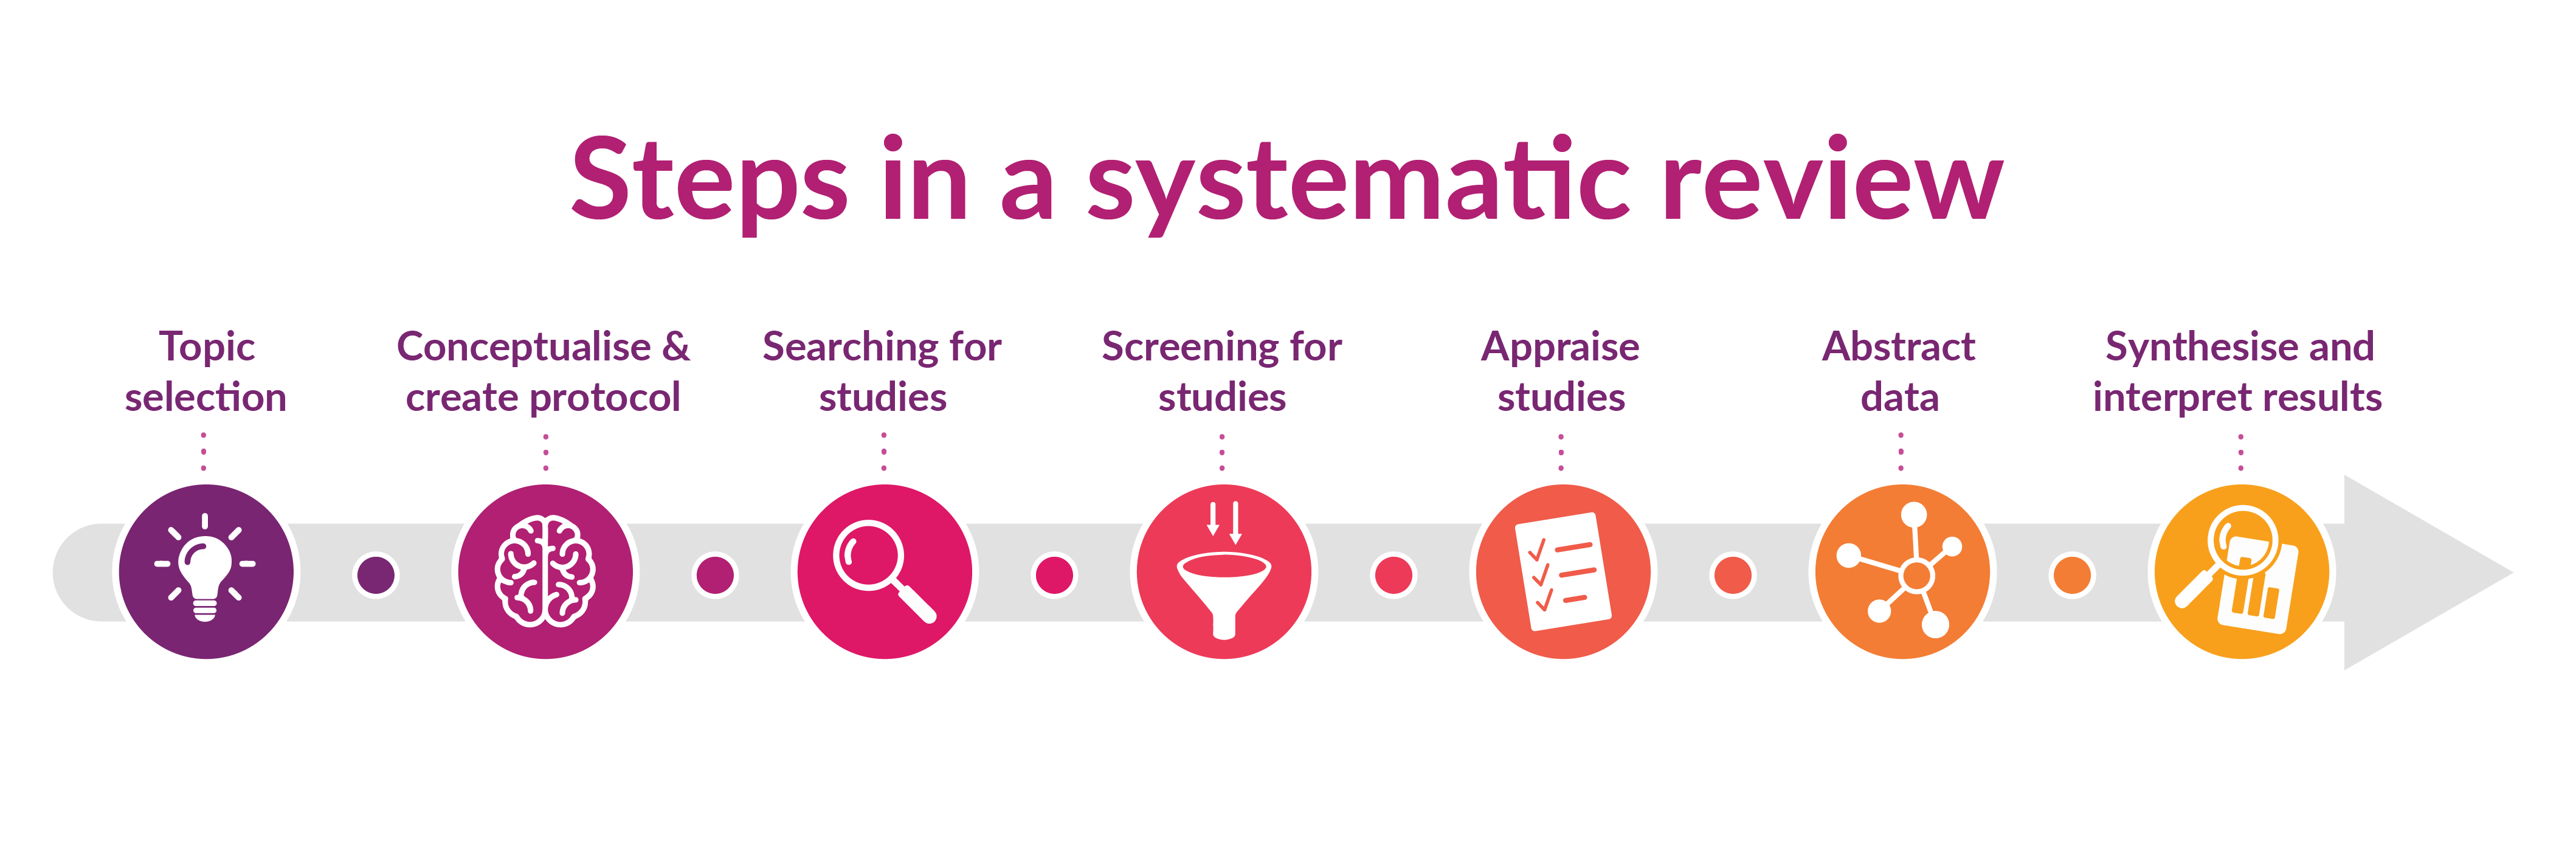 what is an example of a systematic review